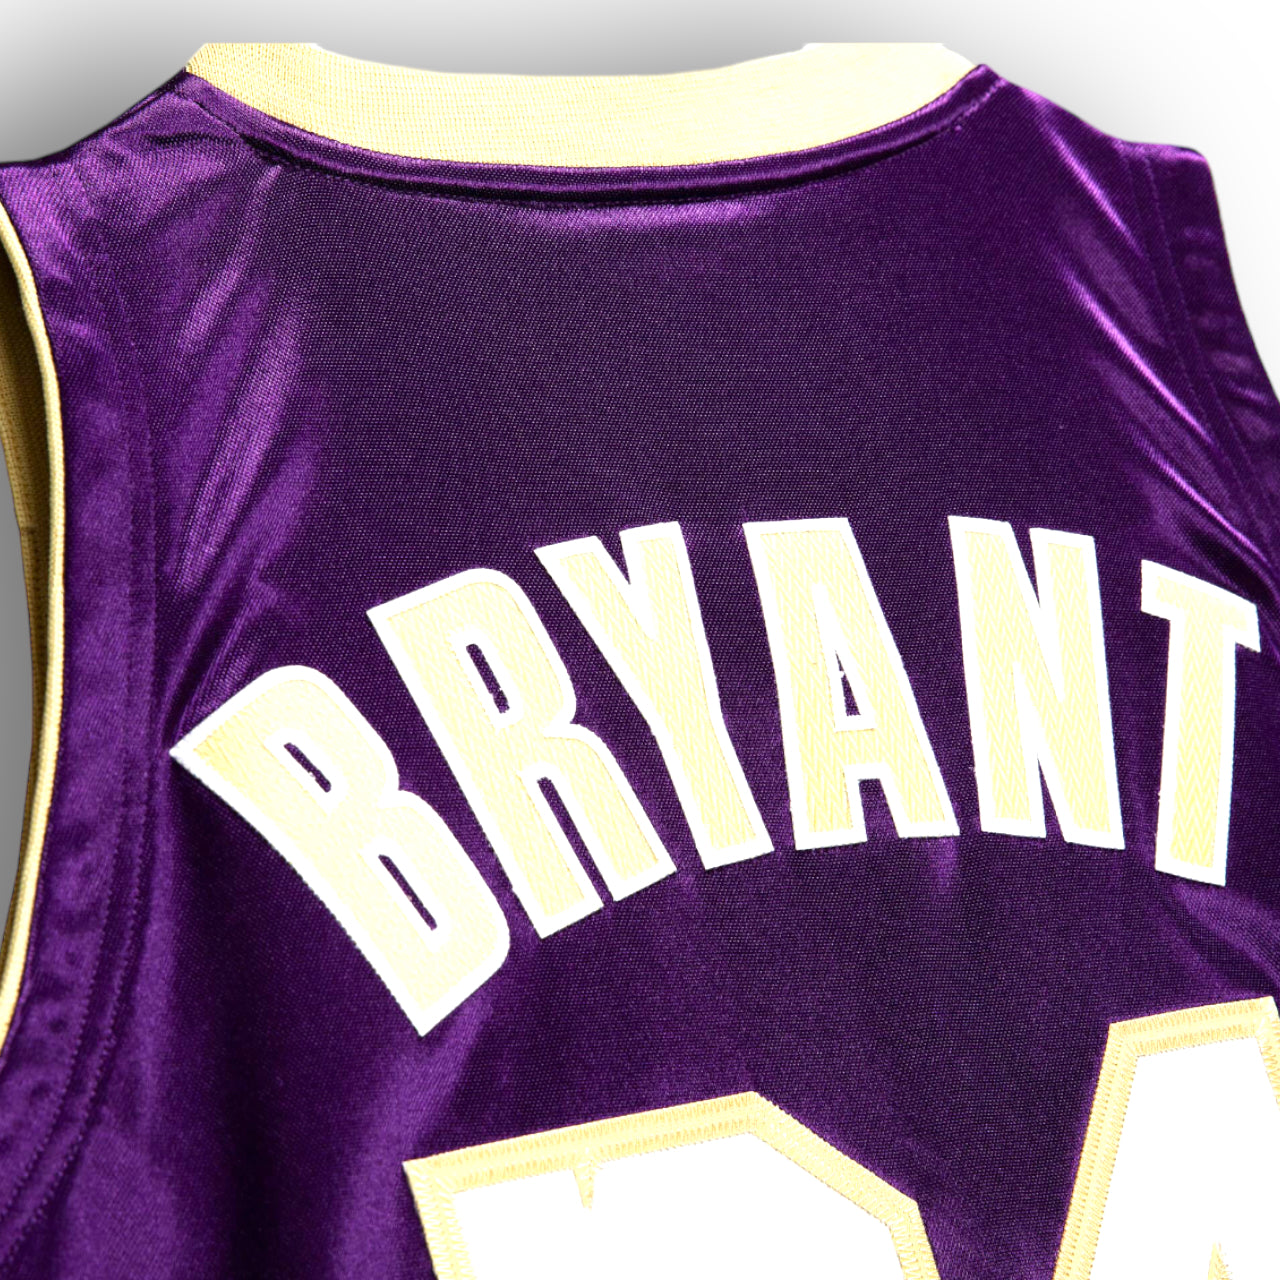 Mitchell and Ness Kobe Bryant Los Angeles Lakers Hall of Fame Edition feat. Mamba Academy Authentic Jersey - Purple #24 - Hoop Jersey Store